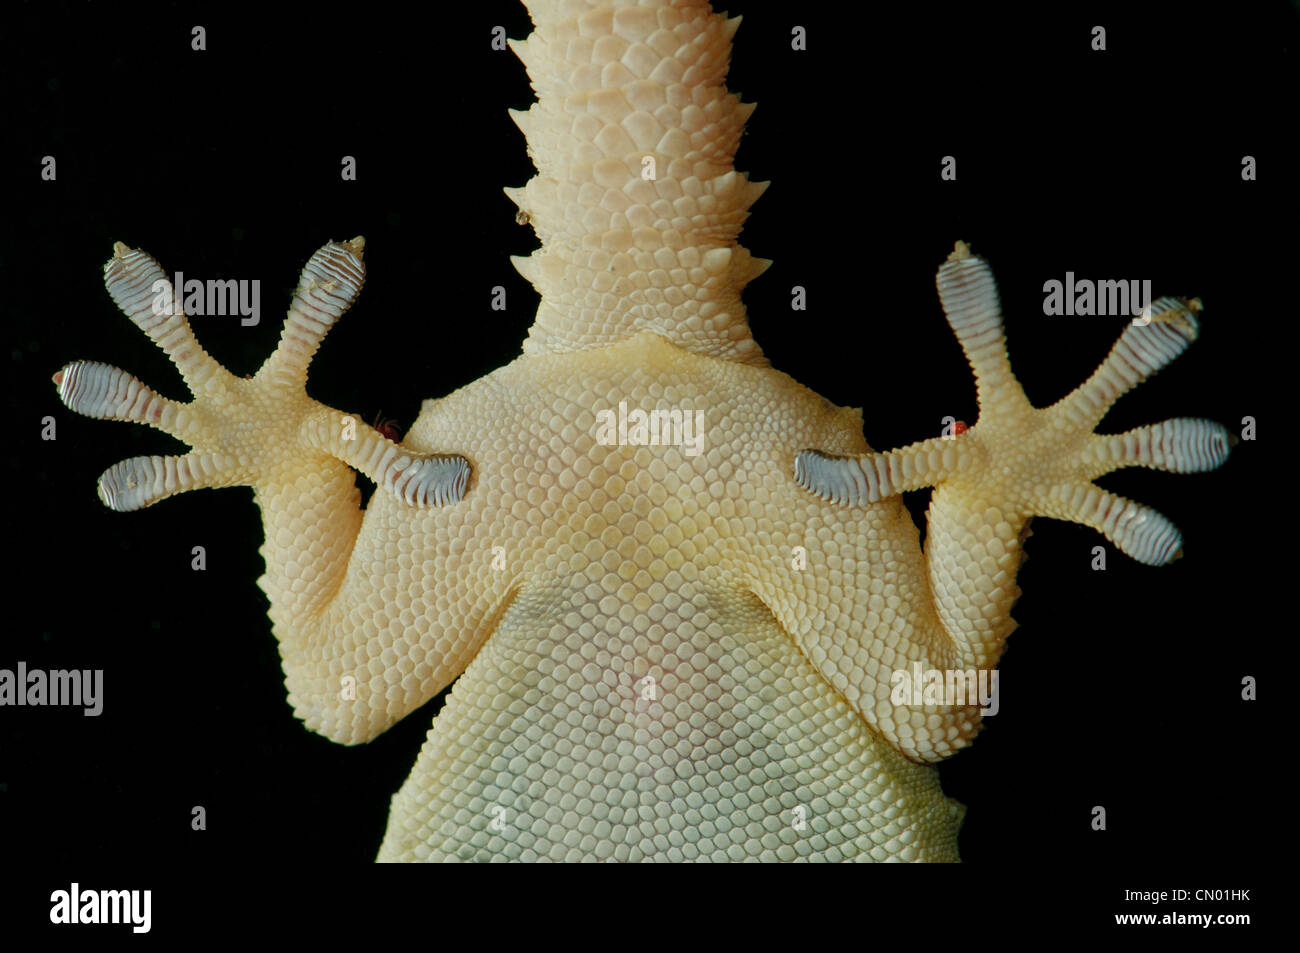 Moorish Gecko Tarentola mauritanica seen from below as photographed from the inner side of a window glass, Spain Stock Photo